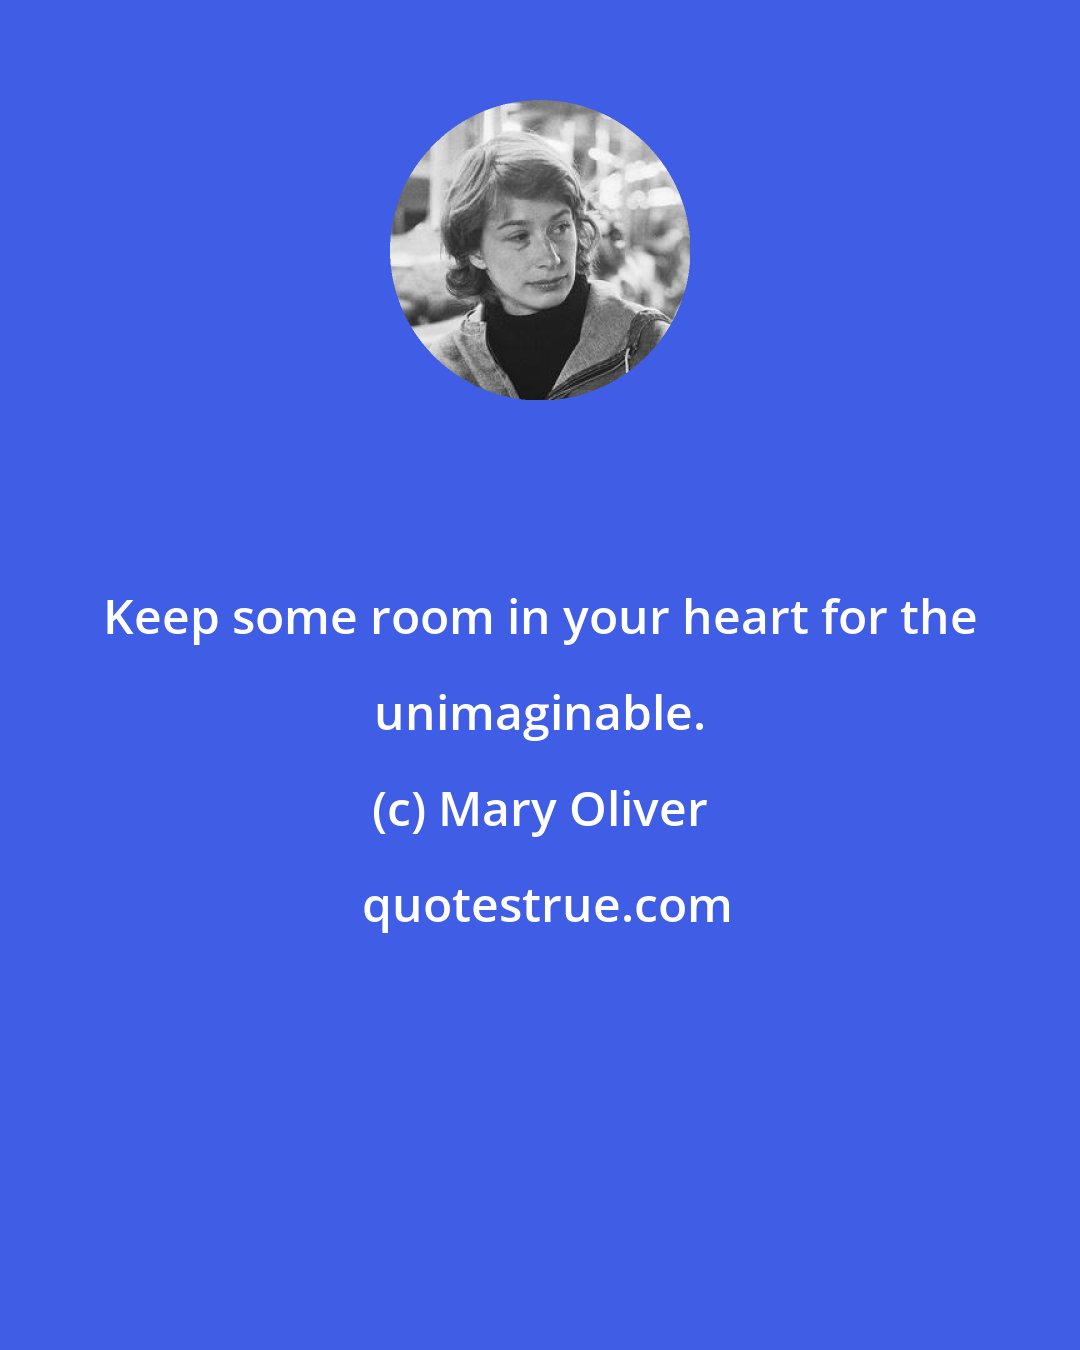 Mary Oliver: Keep some room in your heart for the unimaginable.